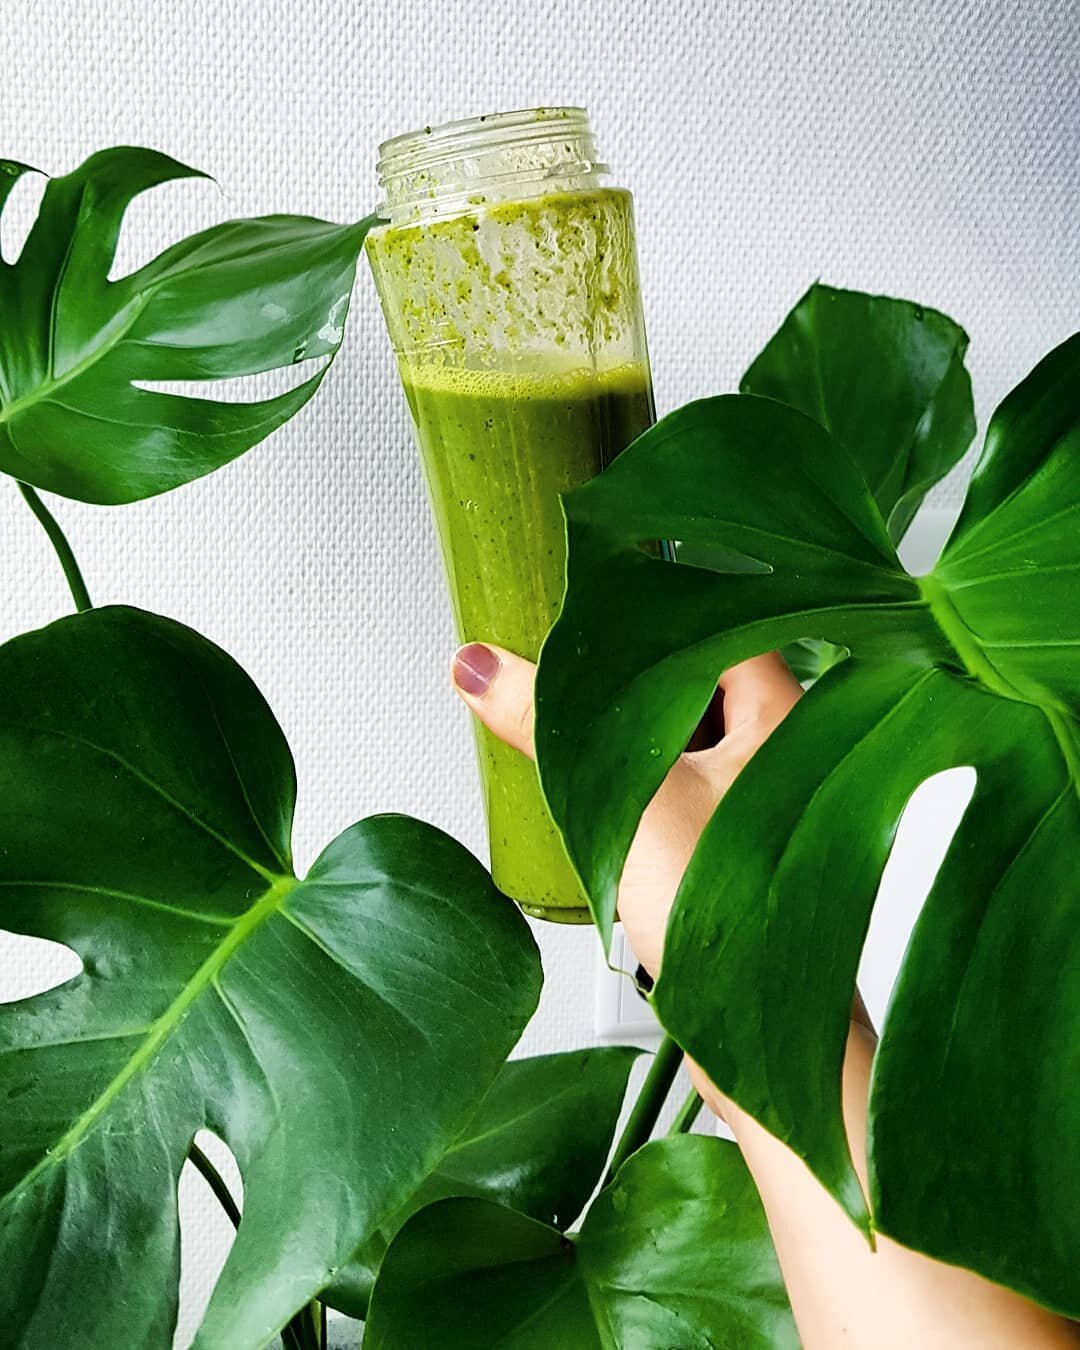 Don't forget to have your greens you all😋🍃🌿
.
I am having my green smoothie today with baby Spinach, banana, lemon, Matcha and a kiwi 🥝🍋🍌🍃🍵
.
How do you like to have your green smoothie? Share your recipe with us in the comment section below!